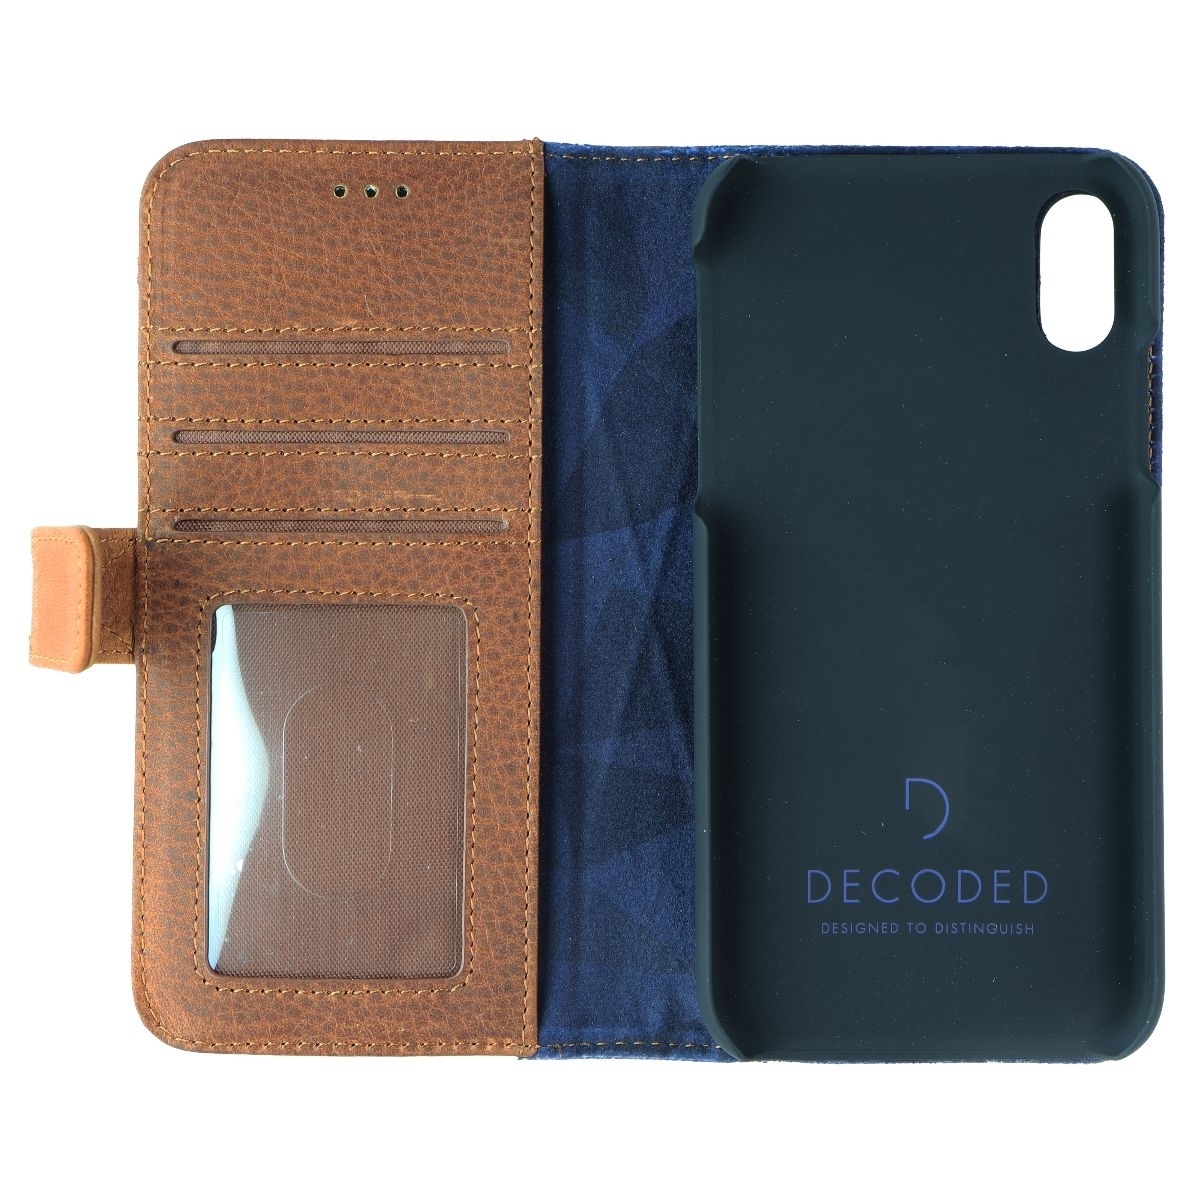 DECODED Full Grain Leather Folio + Case For Apple IPhone XR - Cinnamon Brown